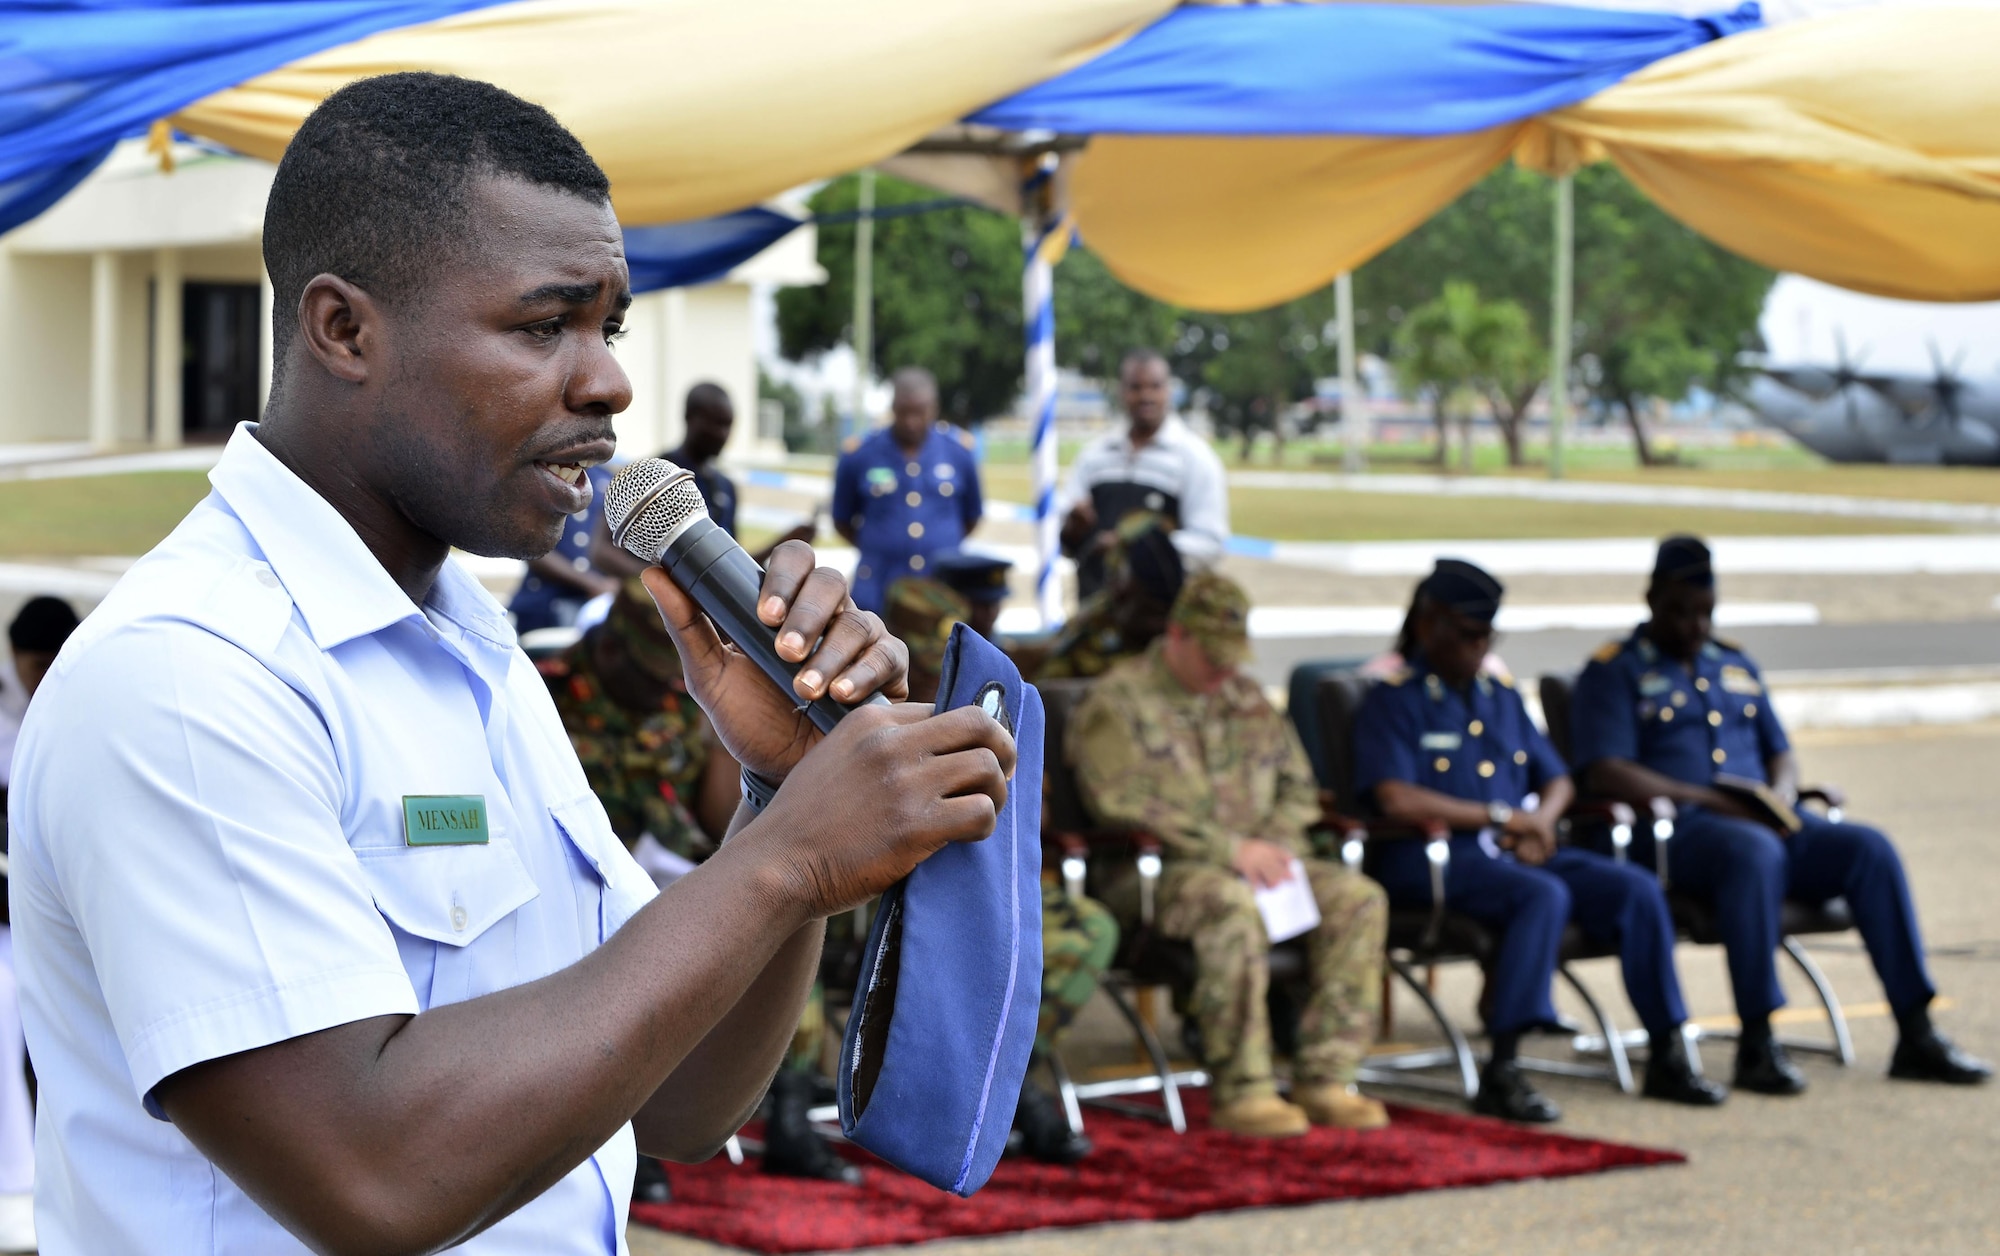 A Ghanaian airman gives an invocation during the opening ceremony of African Flight Partnership in Accra Air Base, Ghana, Sept. 12, 2016. APF is a premier program for delivering aviation security cooperation to African partners. (U.S. Air Force photo by Staff Sgt. Stephanie Longoria)